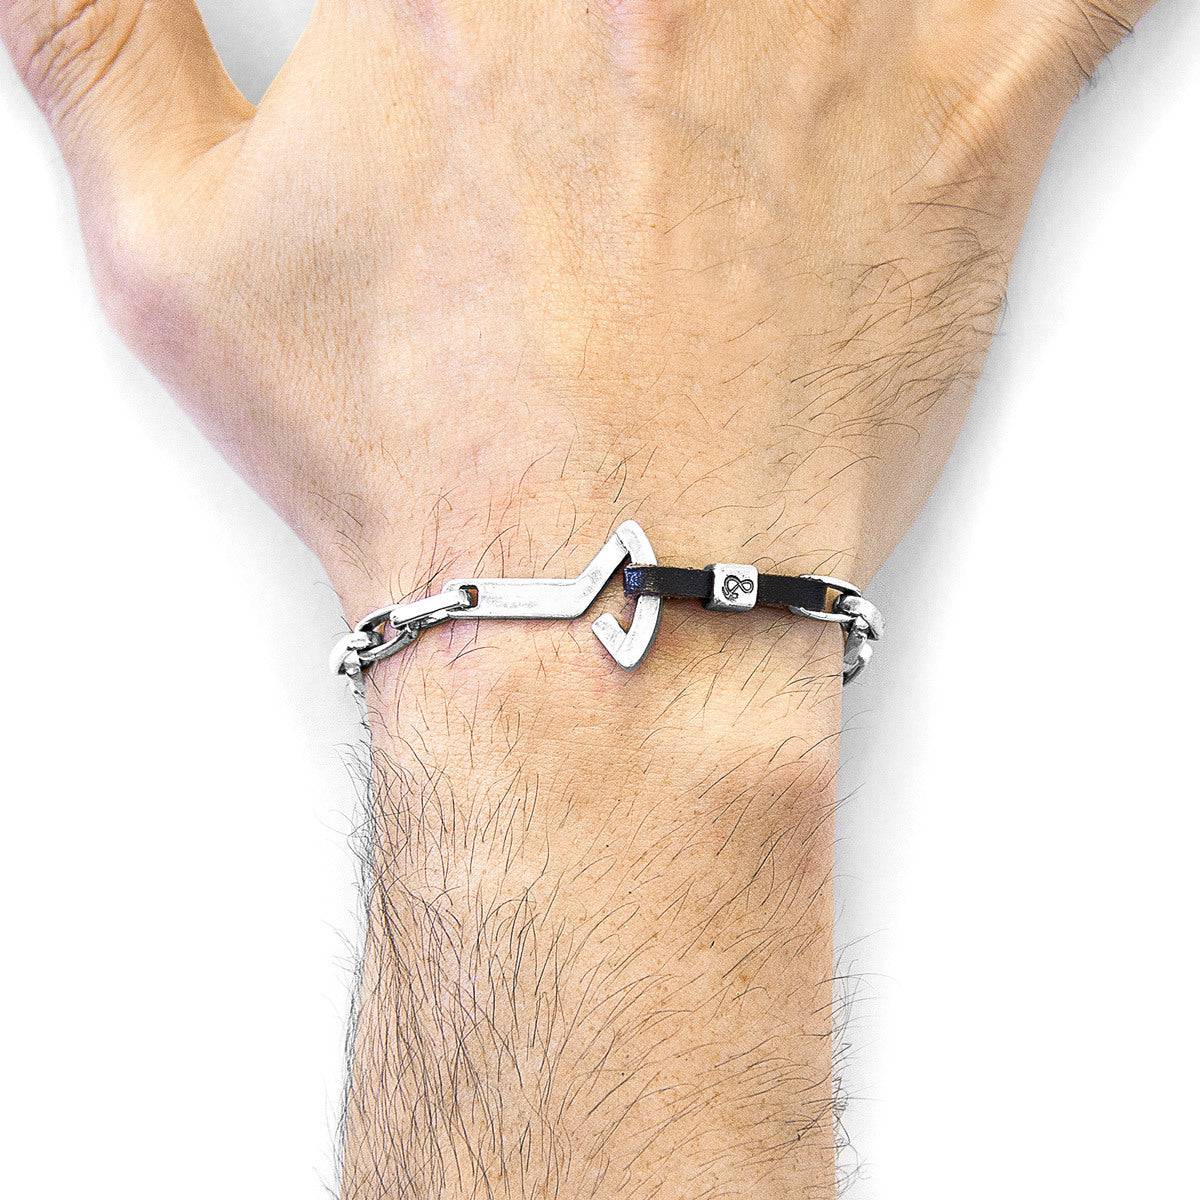 Dark Brown Frigate Bracelet by Anchor & Crew - Silver and Leather - Vogue J'adore